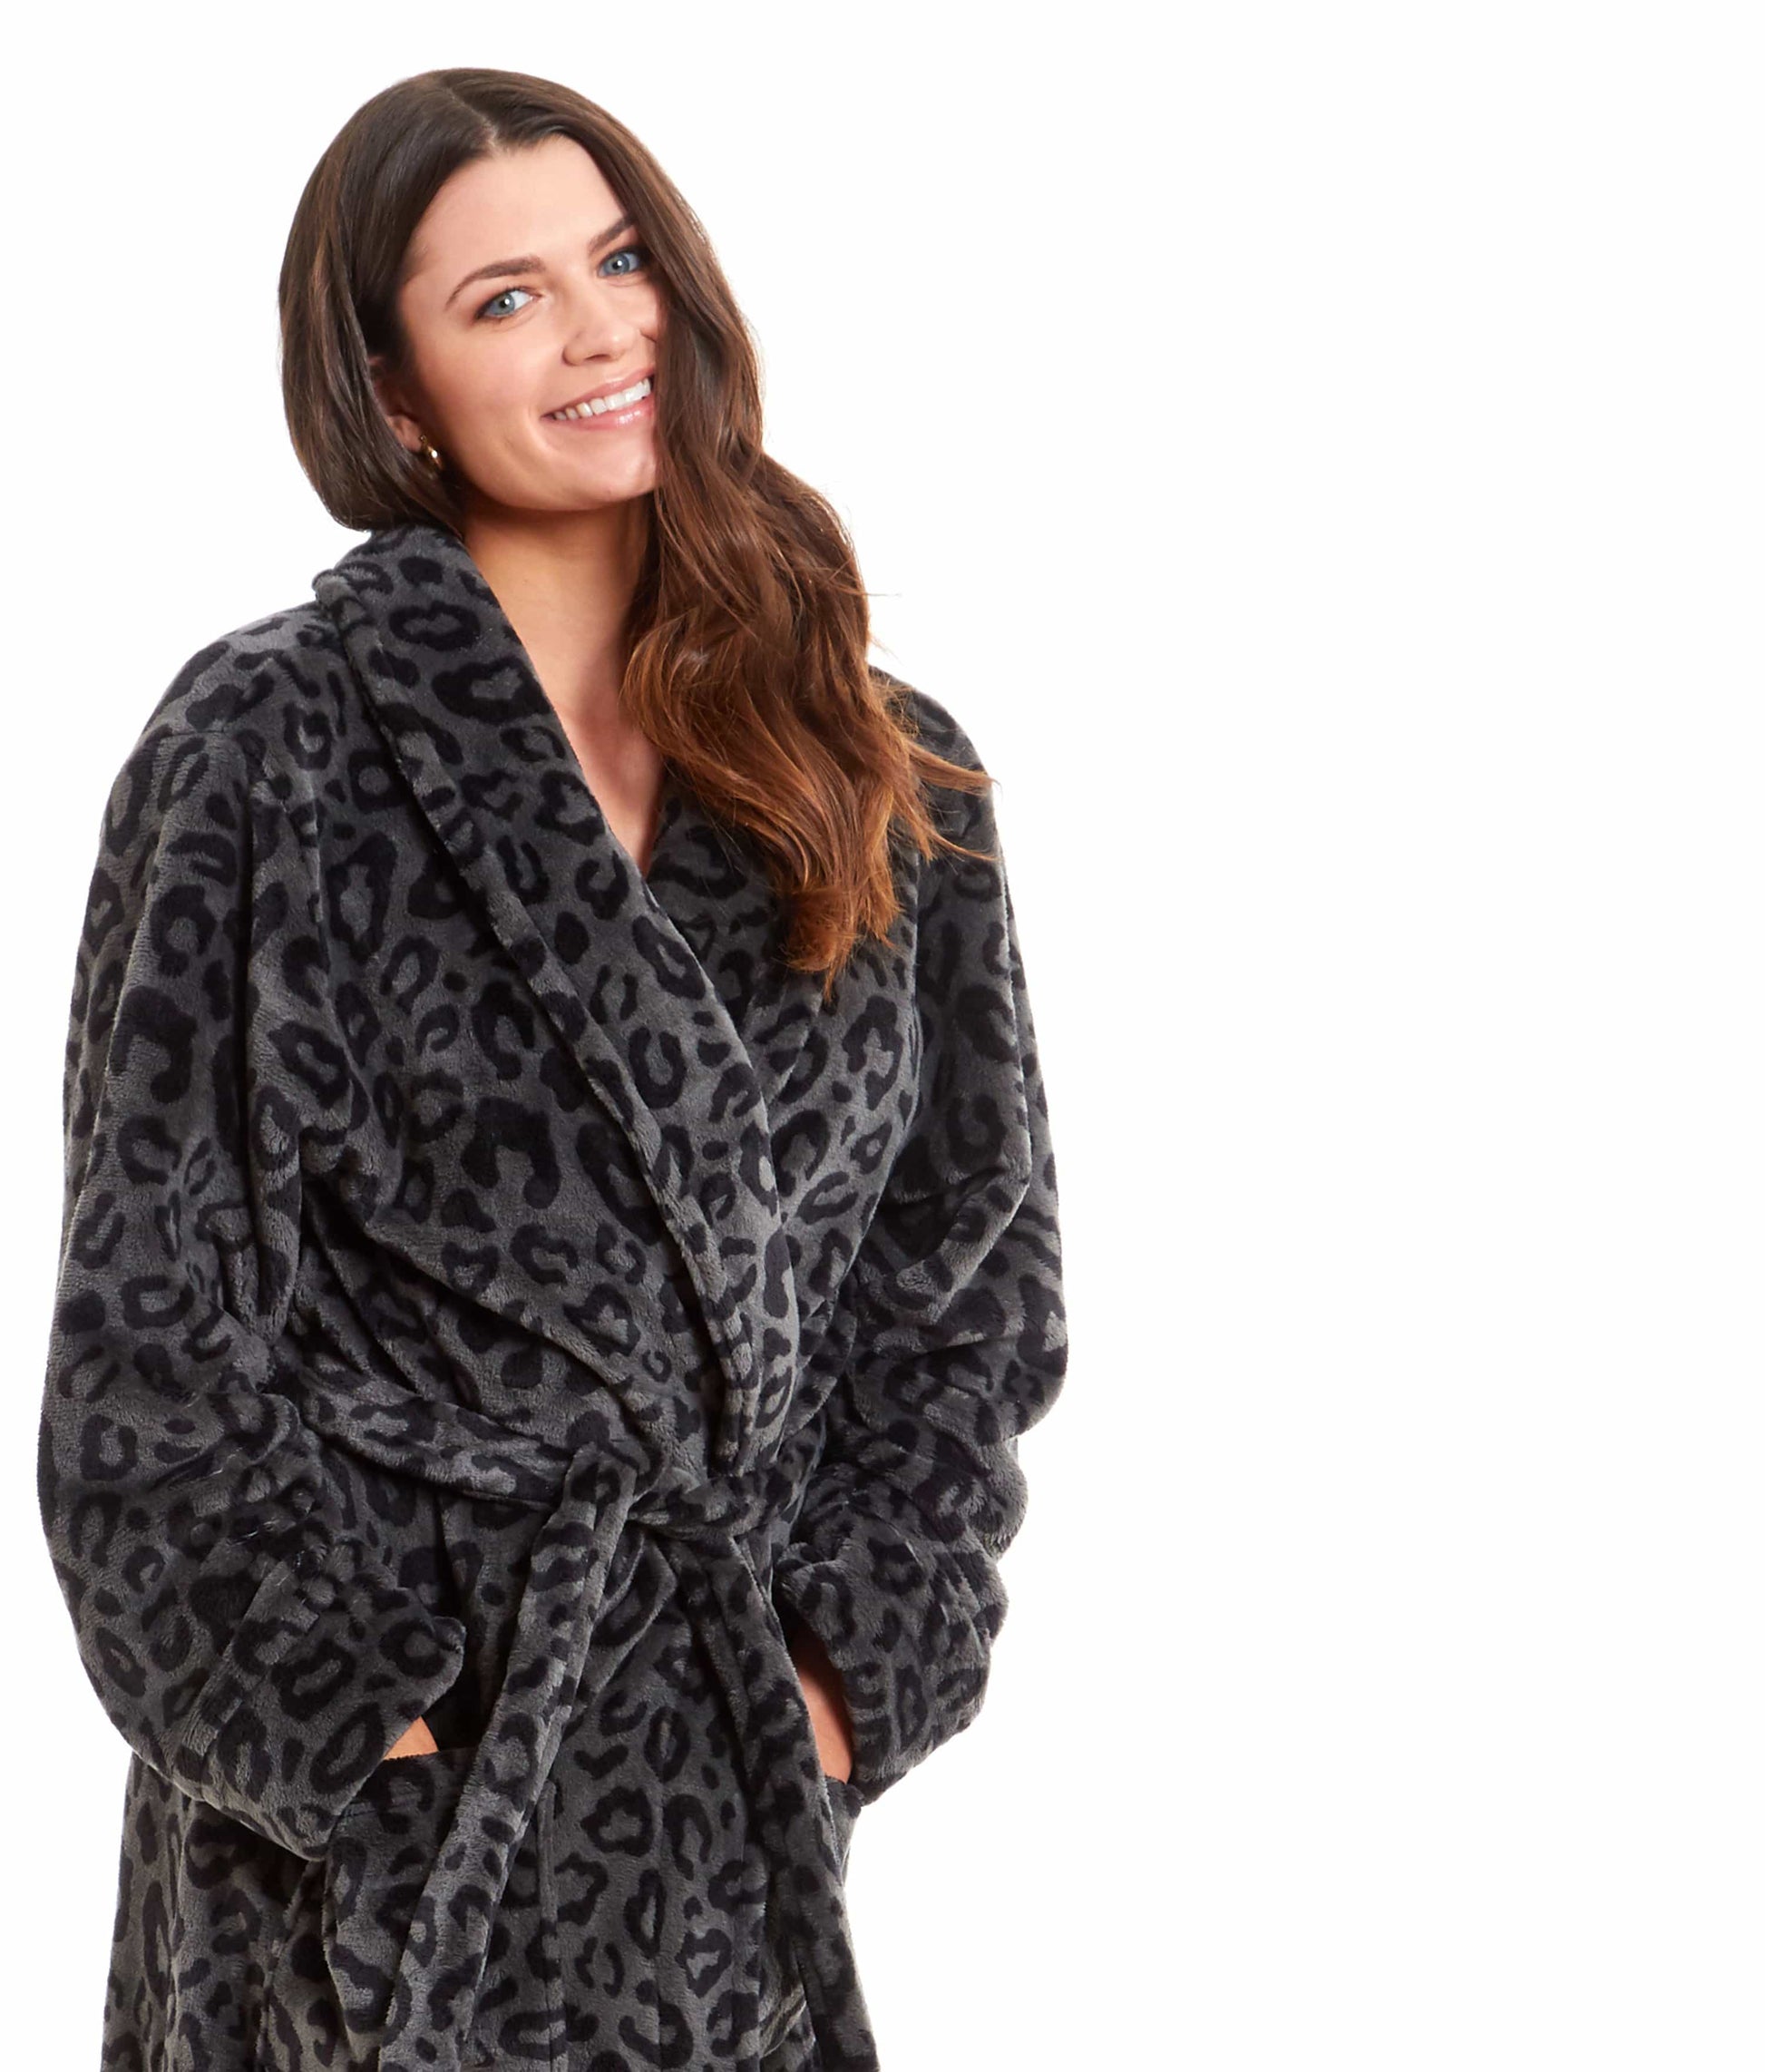 Women's Black Leopard Plush Fleece Bath Robe Dressing Gown. Buy now for £20.00. A Robe by Daisy Dreamer. 12-14, 16-18, 20-22, 8-10, animal, black, black panther, bridesmaid, cheetah, dressing gown, flannel, fleece, gym, hotel, ladies, large, leopard, loun